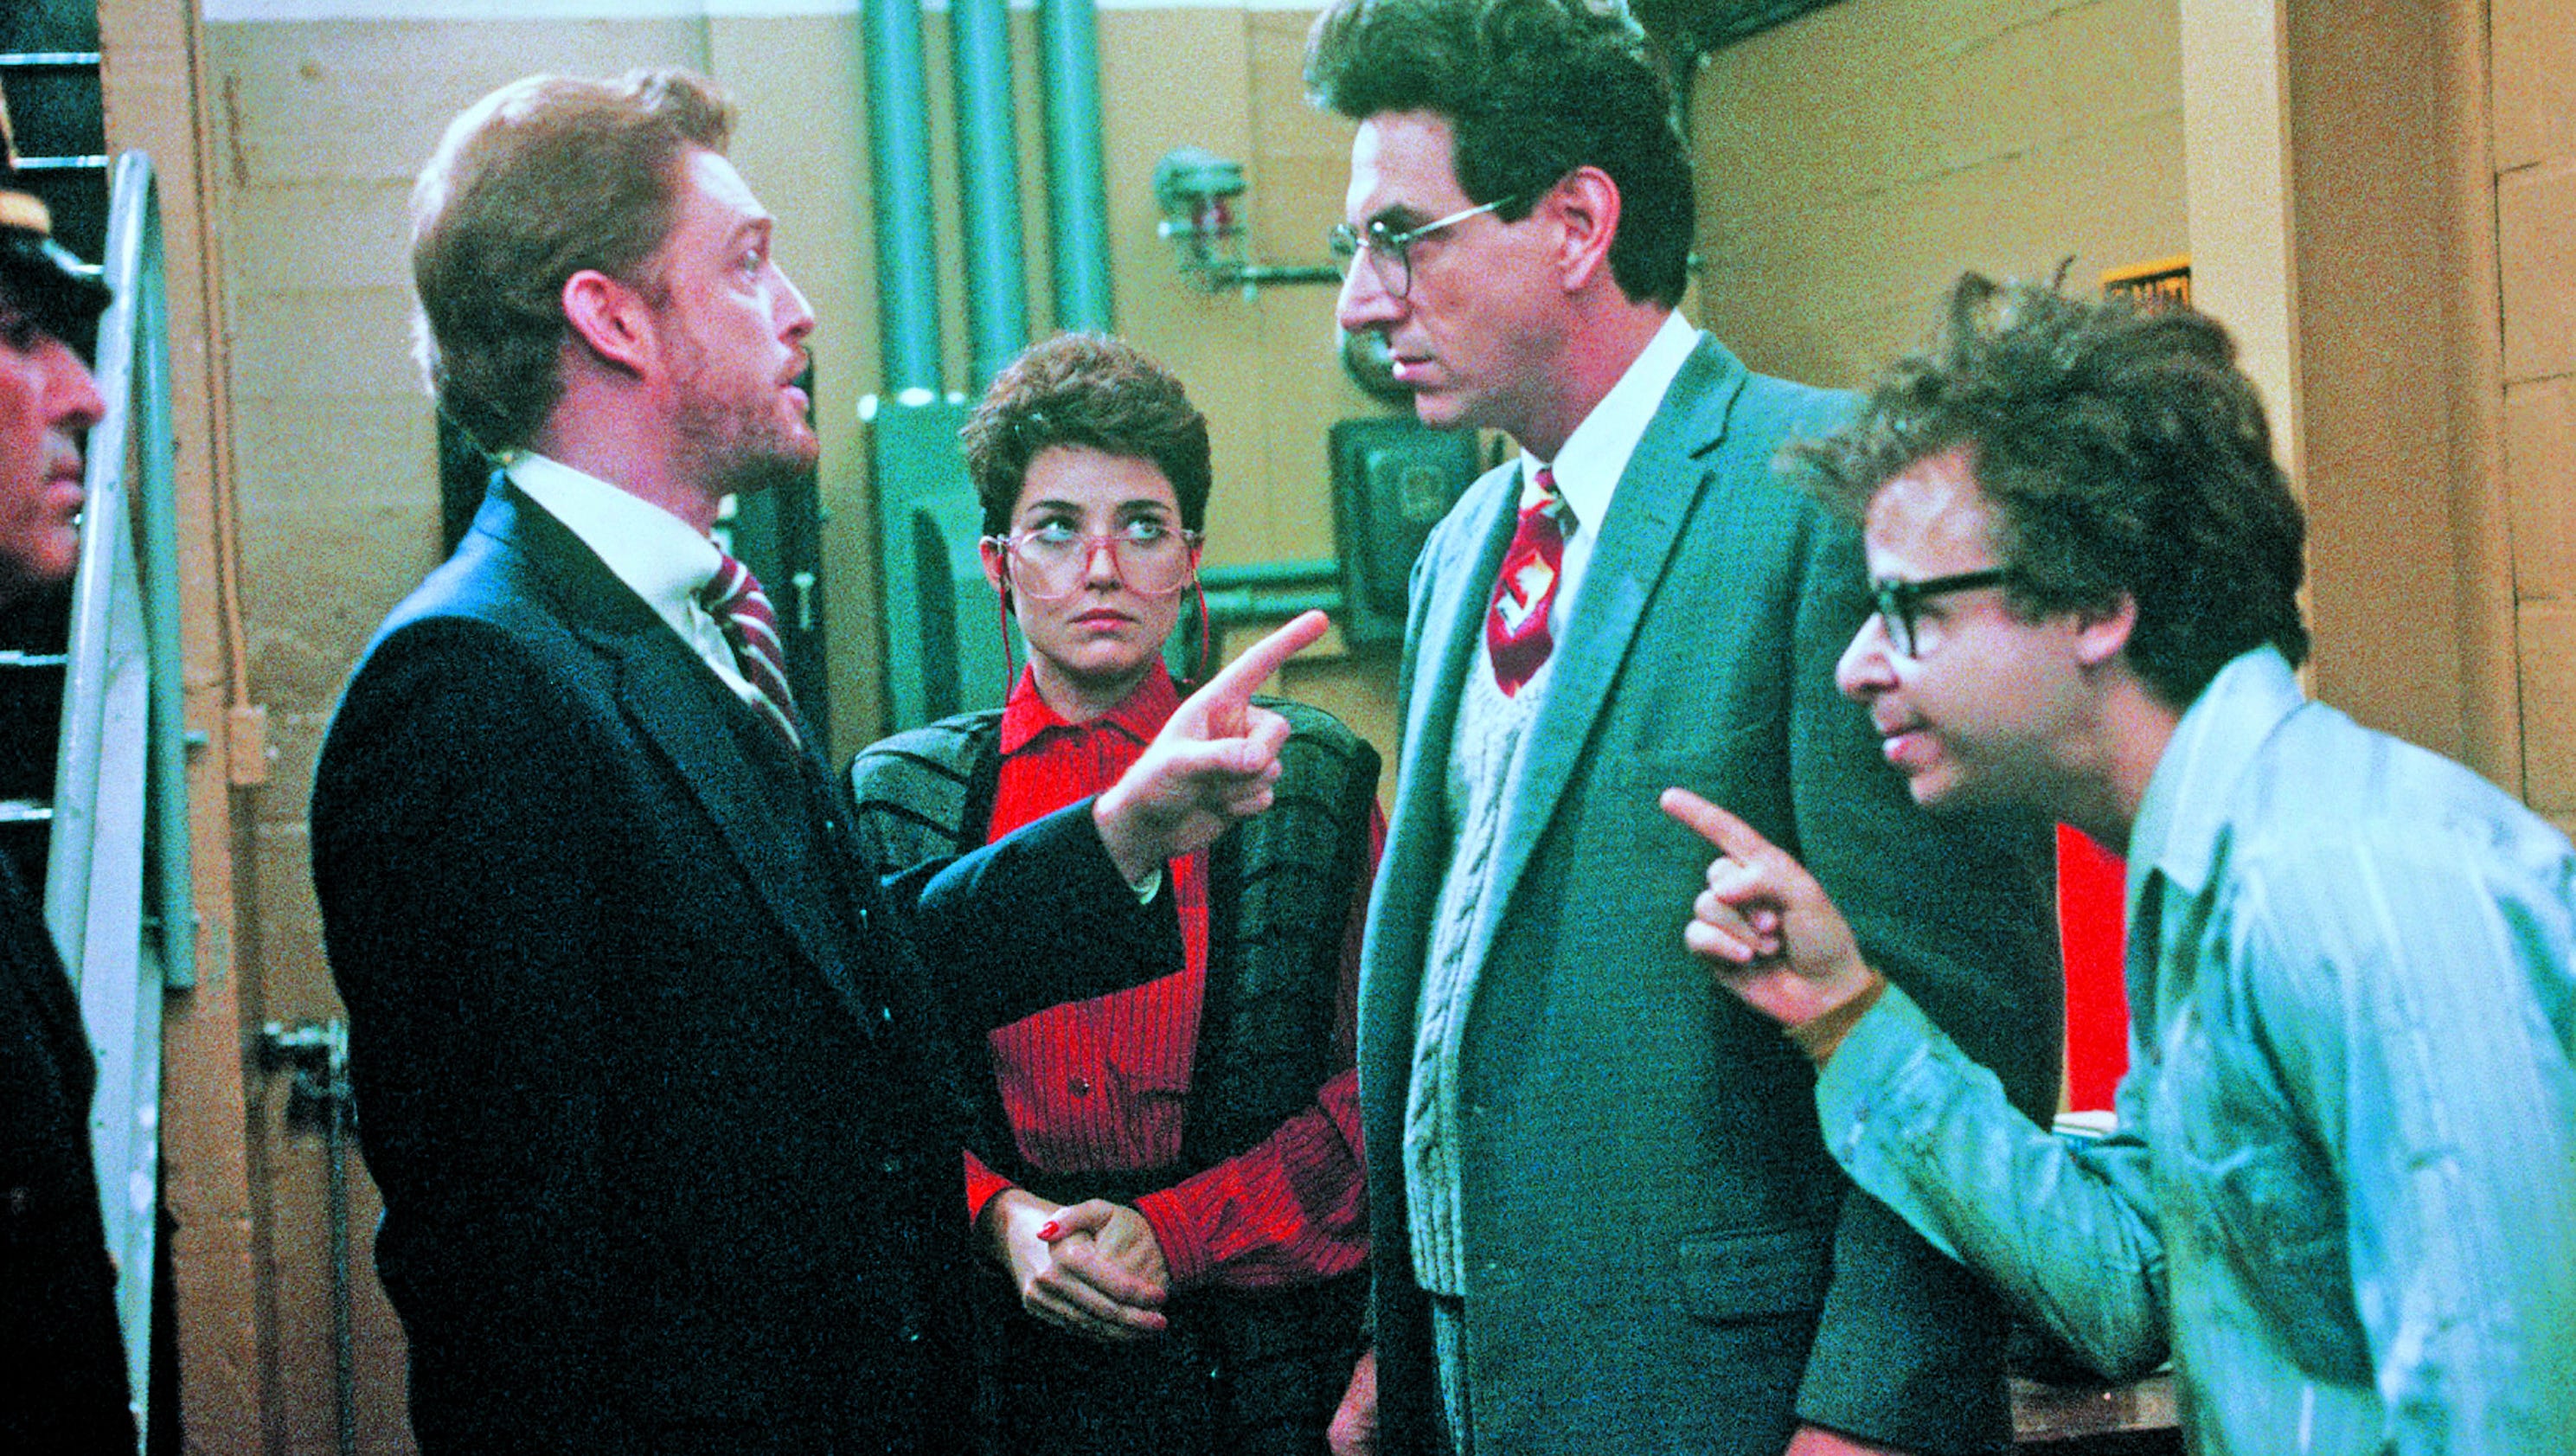 Rick Moranis turned down 'Ghostbusters' cameo, because it made 'no sense'